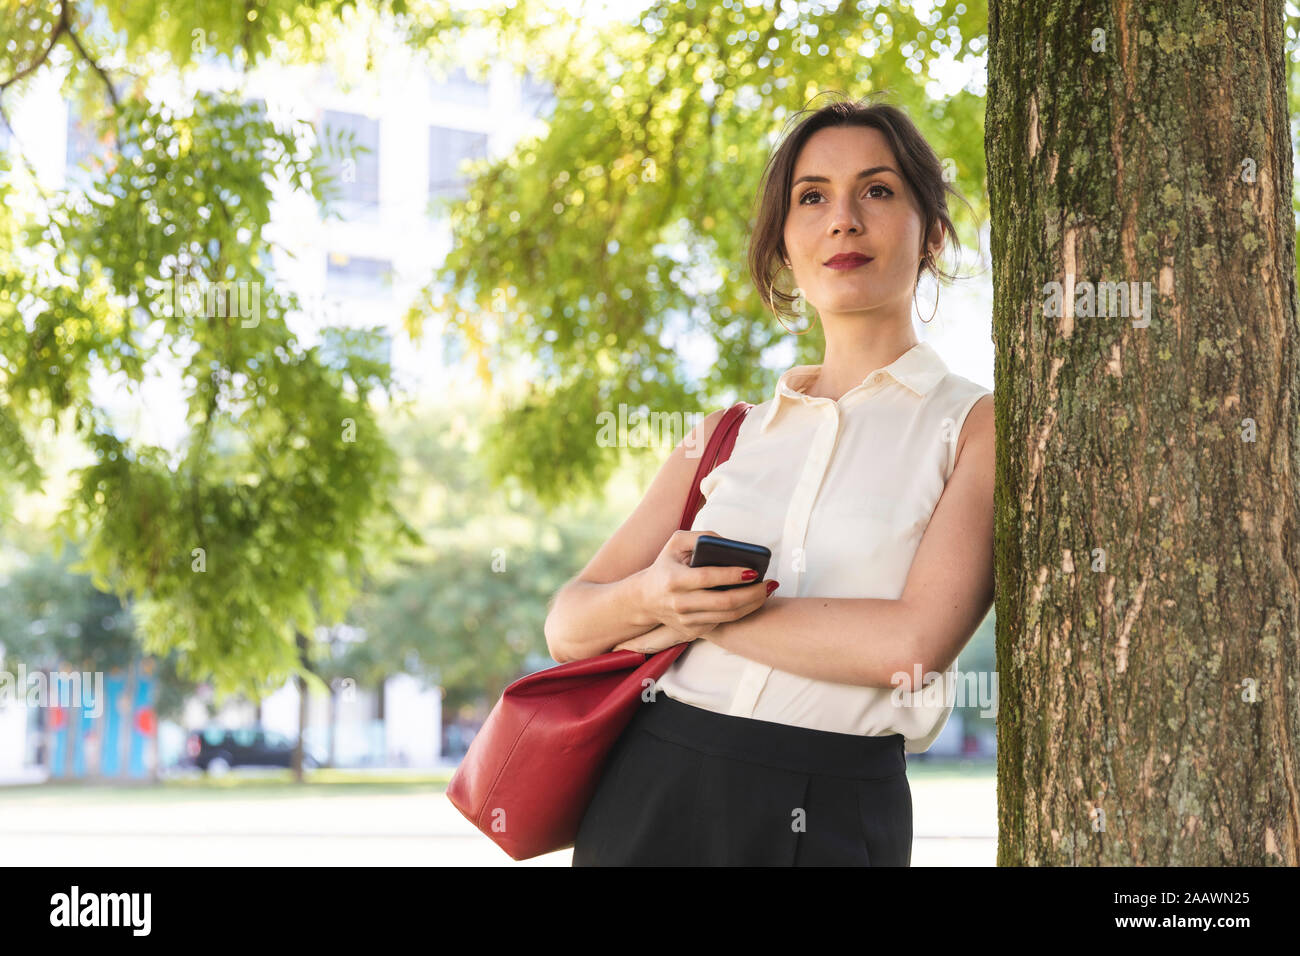 Young businesswoman with cell phone in a park Banque D'Images